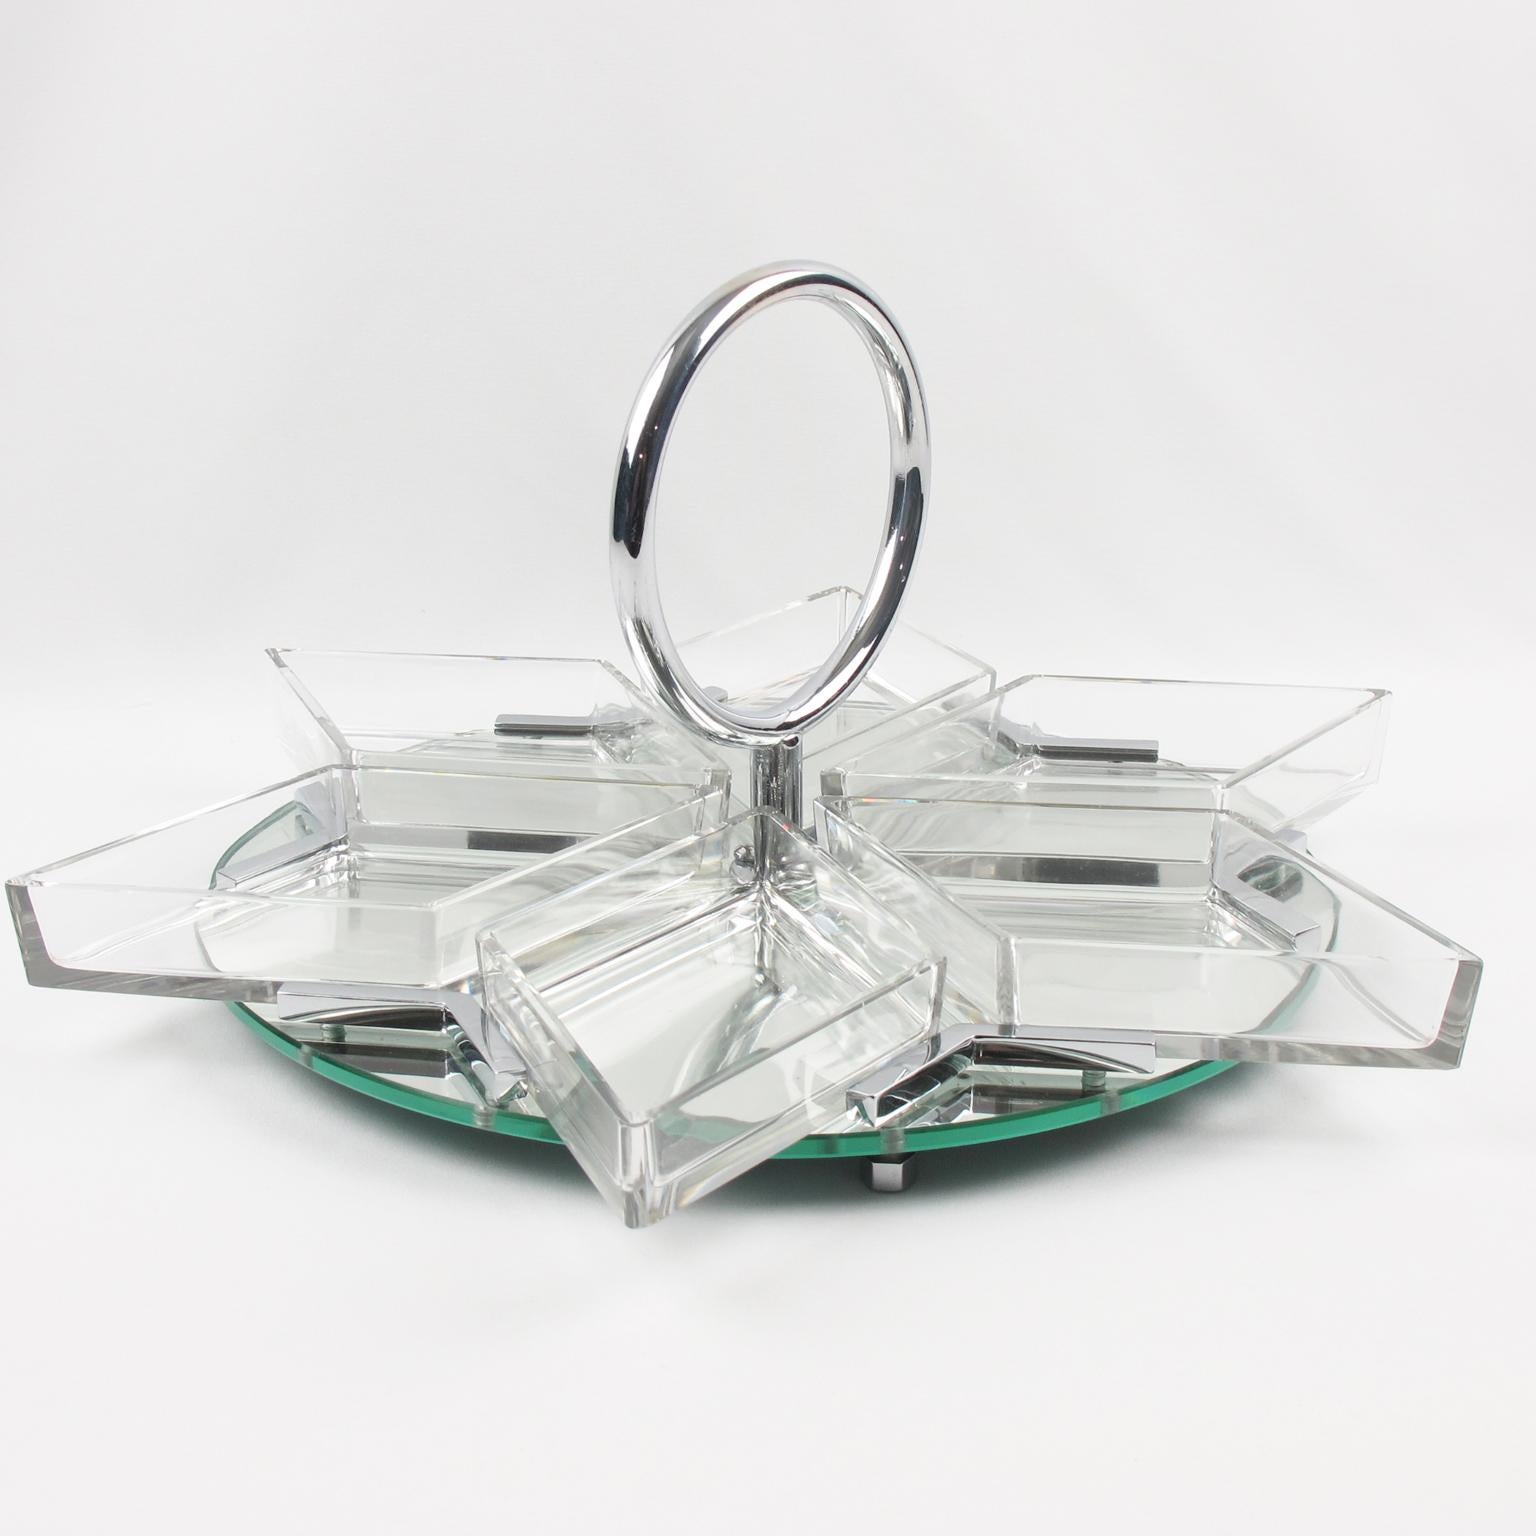 Mid-20th Century French Art Deco Cocktail Set Barware Mirror Serving Tray and Crystal Dishes